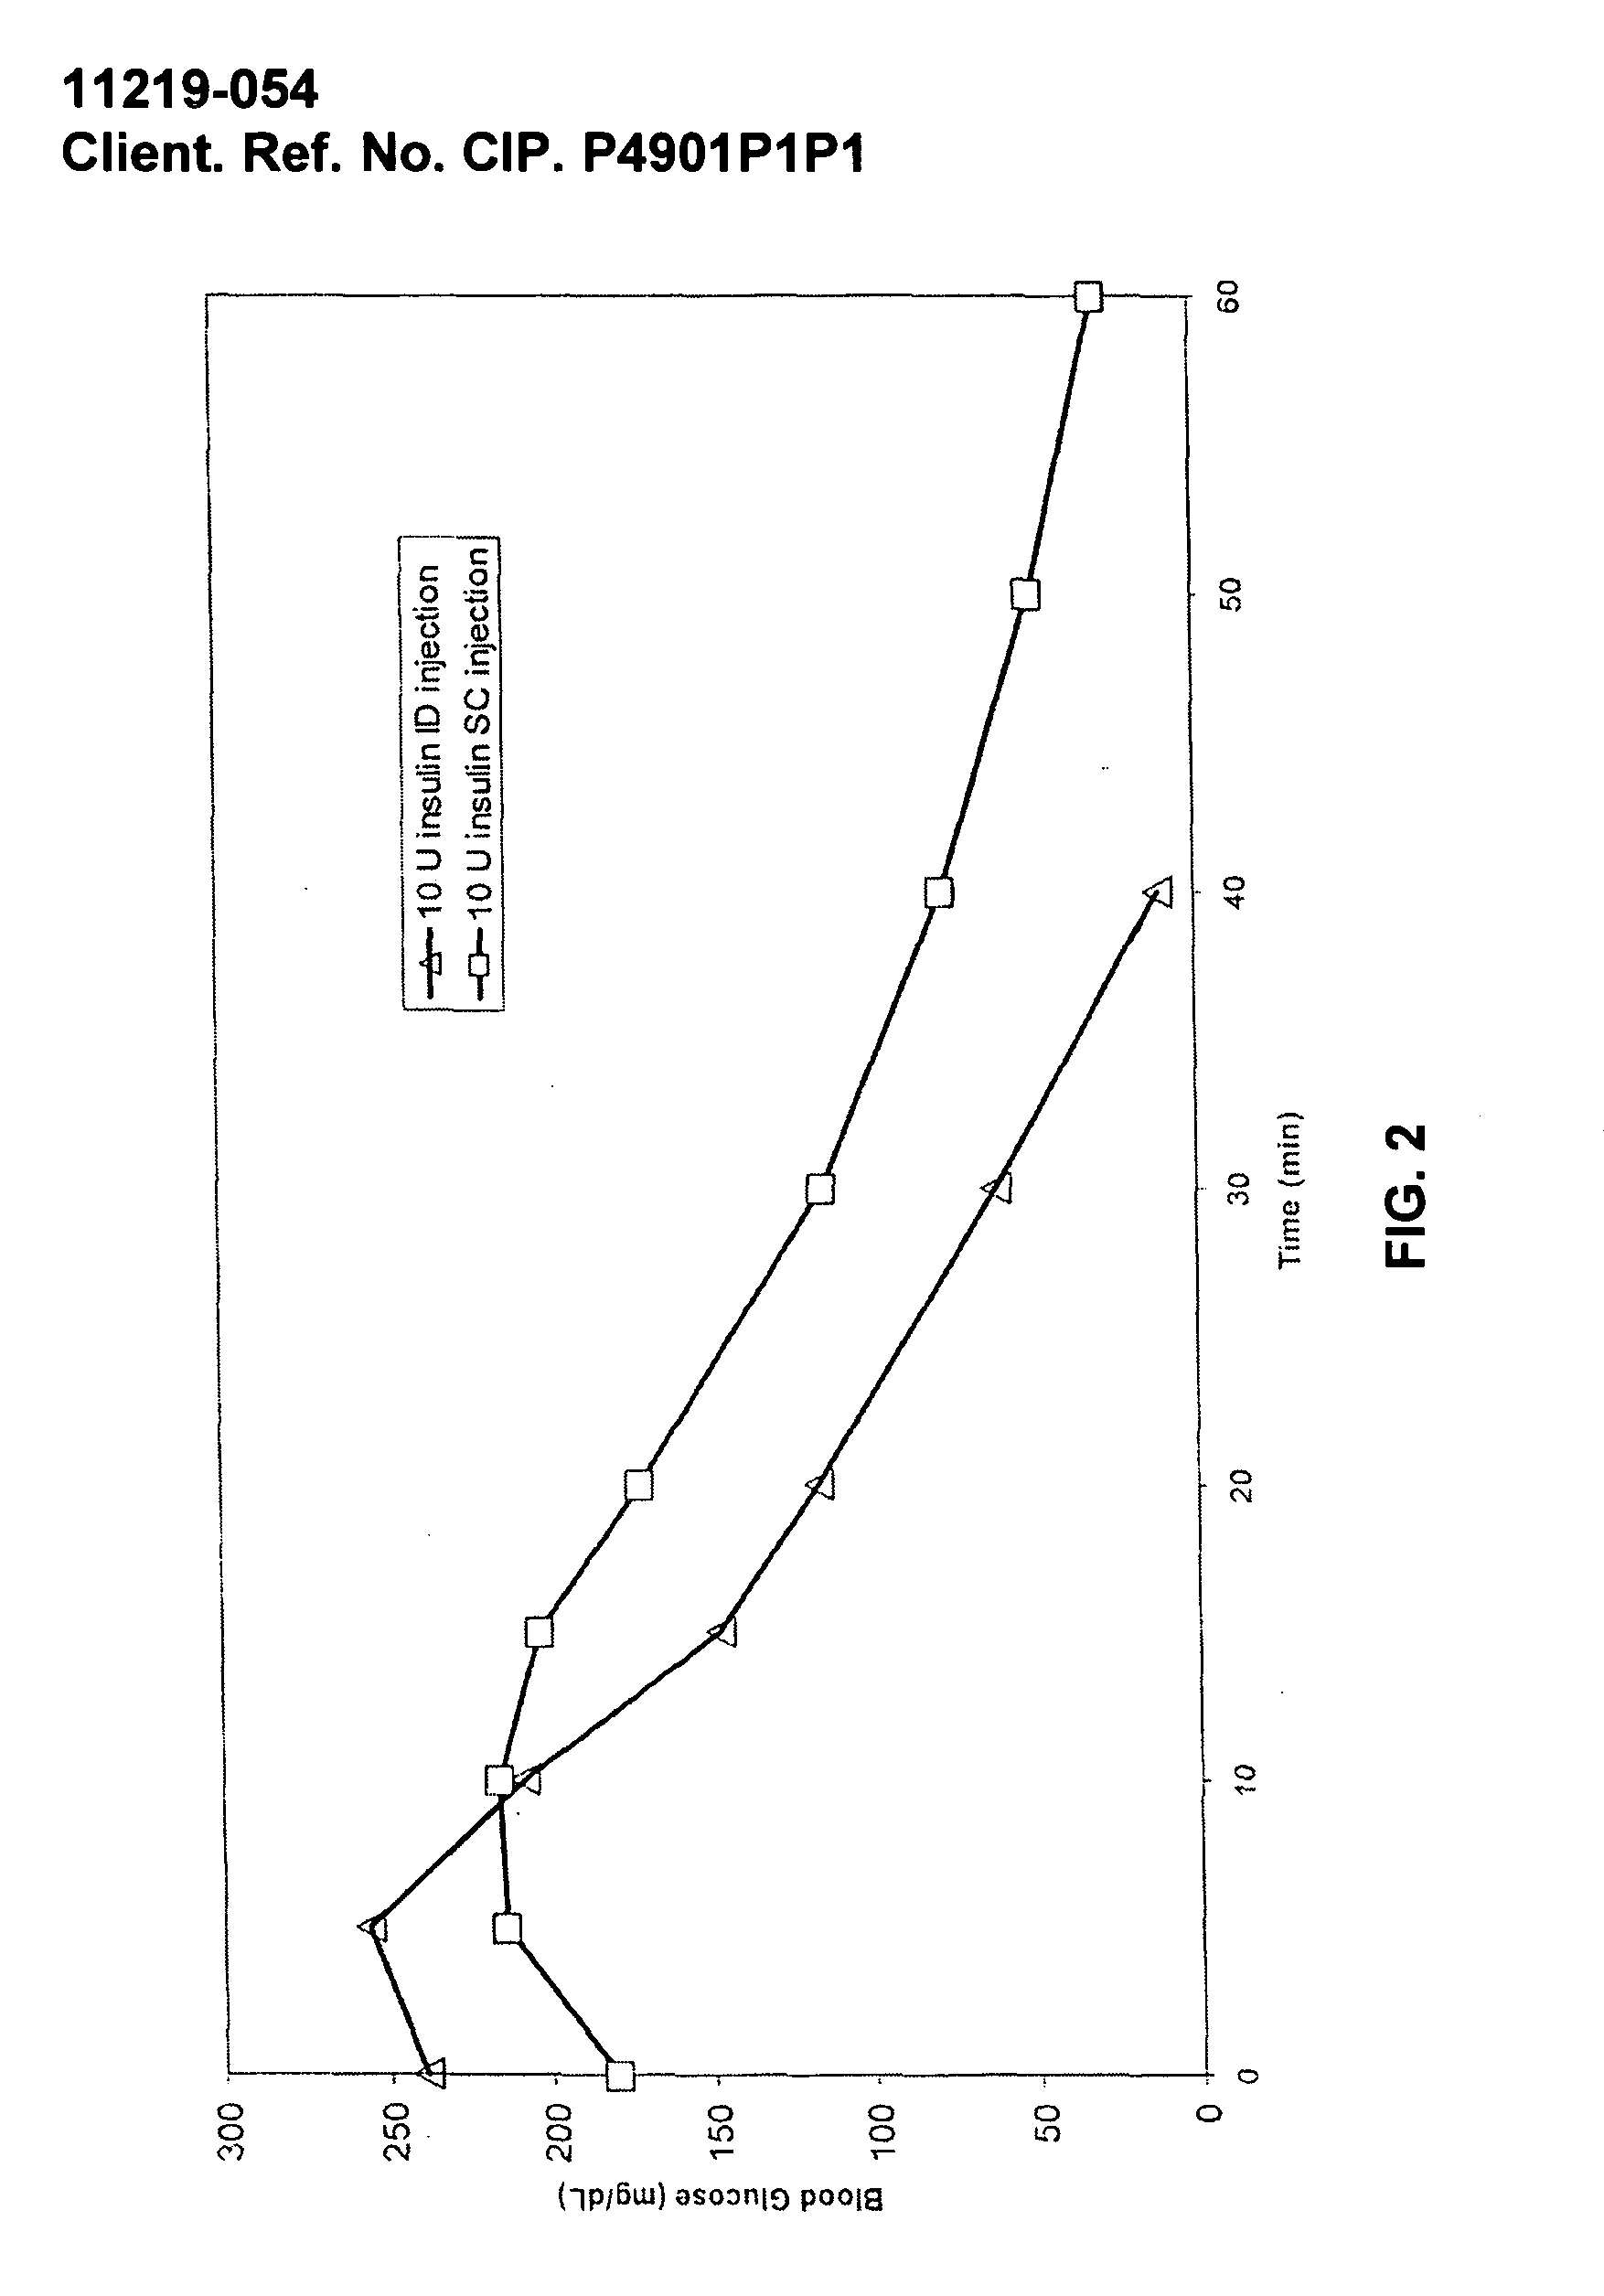 Method for delivering interferons to the intradermal compartment